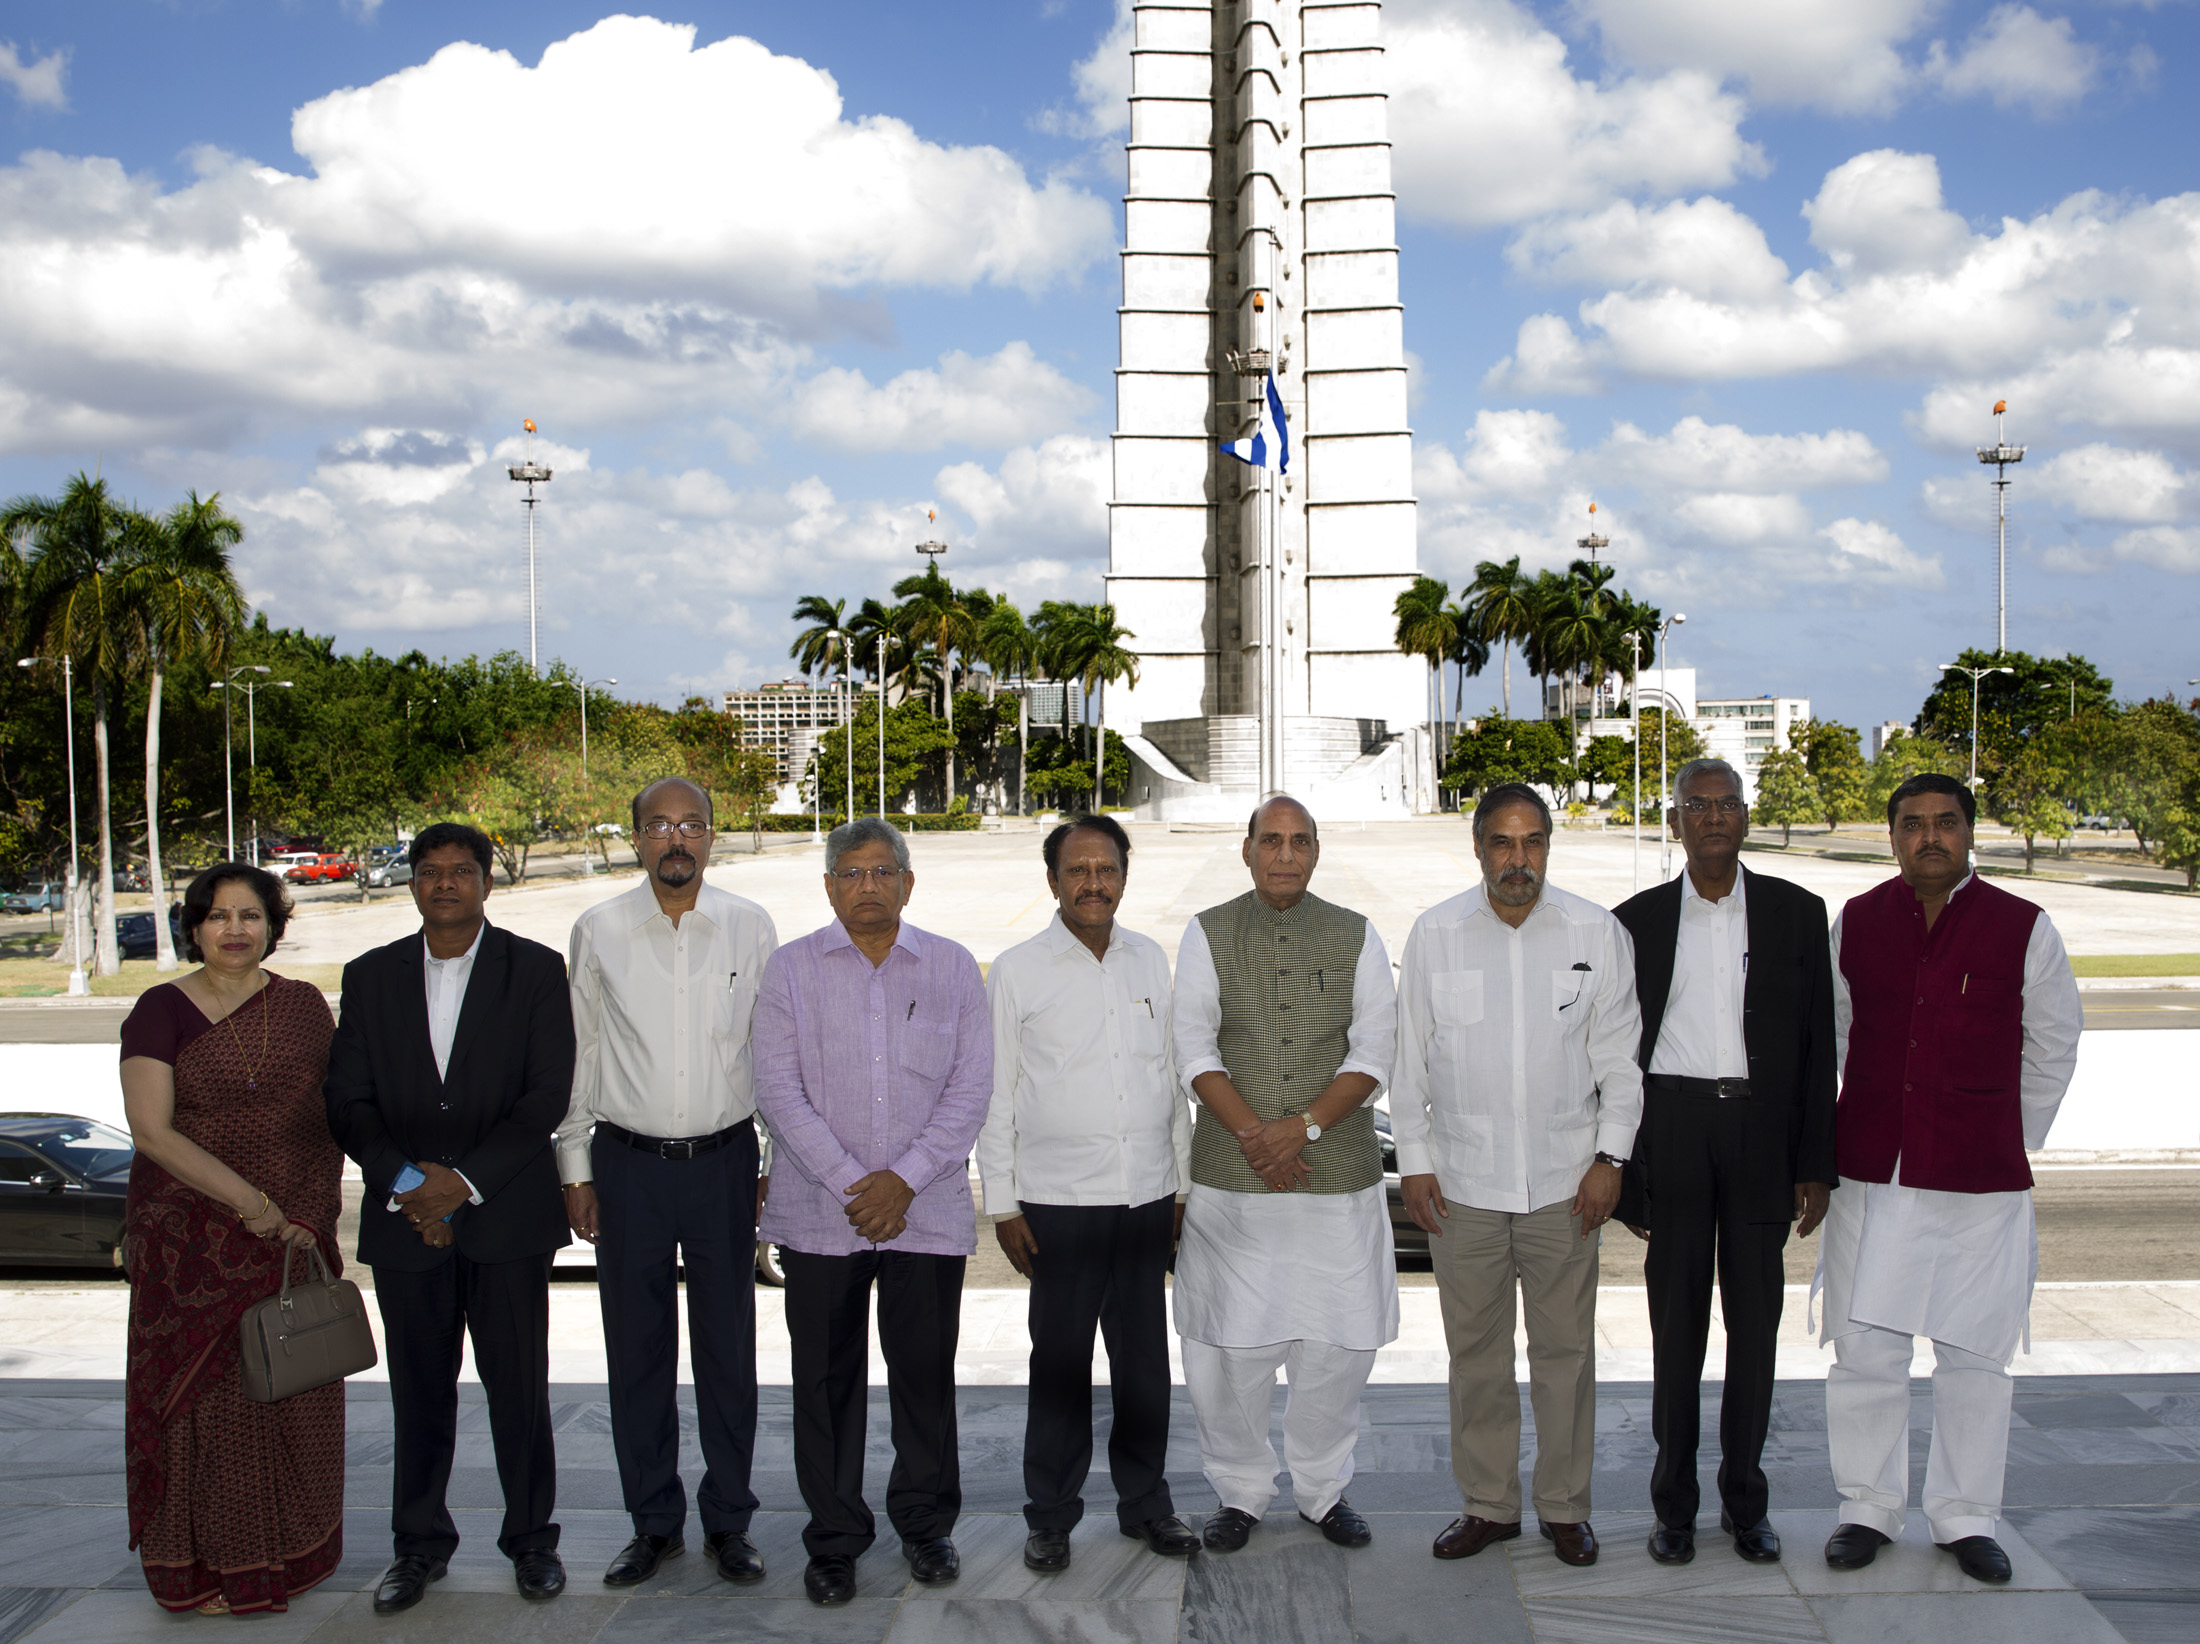 The parliamentary delegation led by the Union Home Minister, Shri Rajnath Singh, at the Jose Marti Revolution Square, in Havana on November 30, 2016.